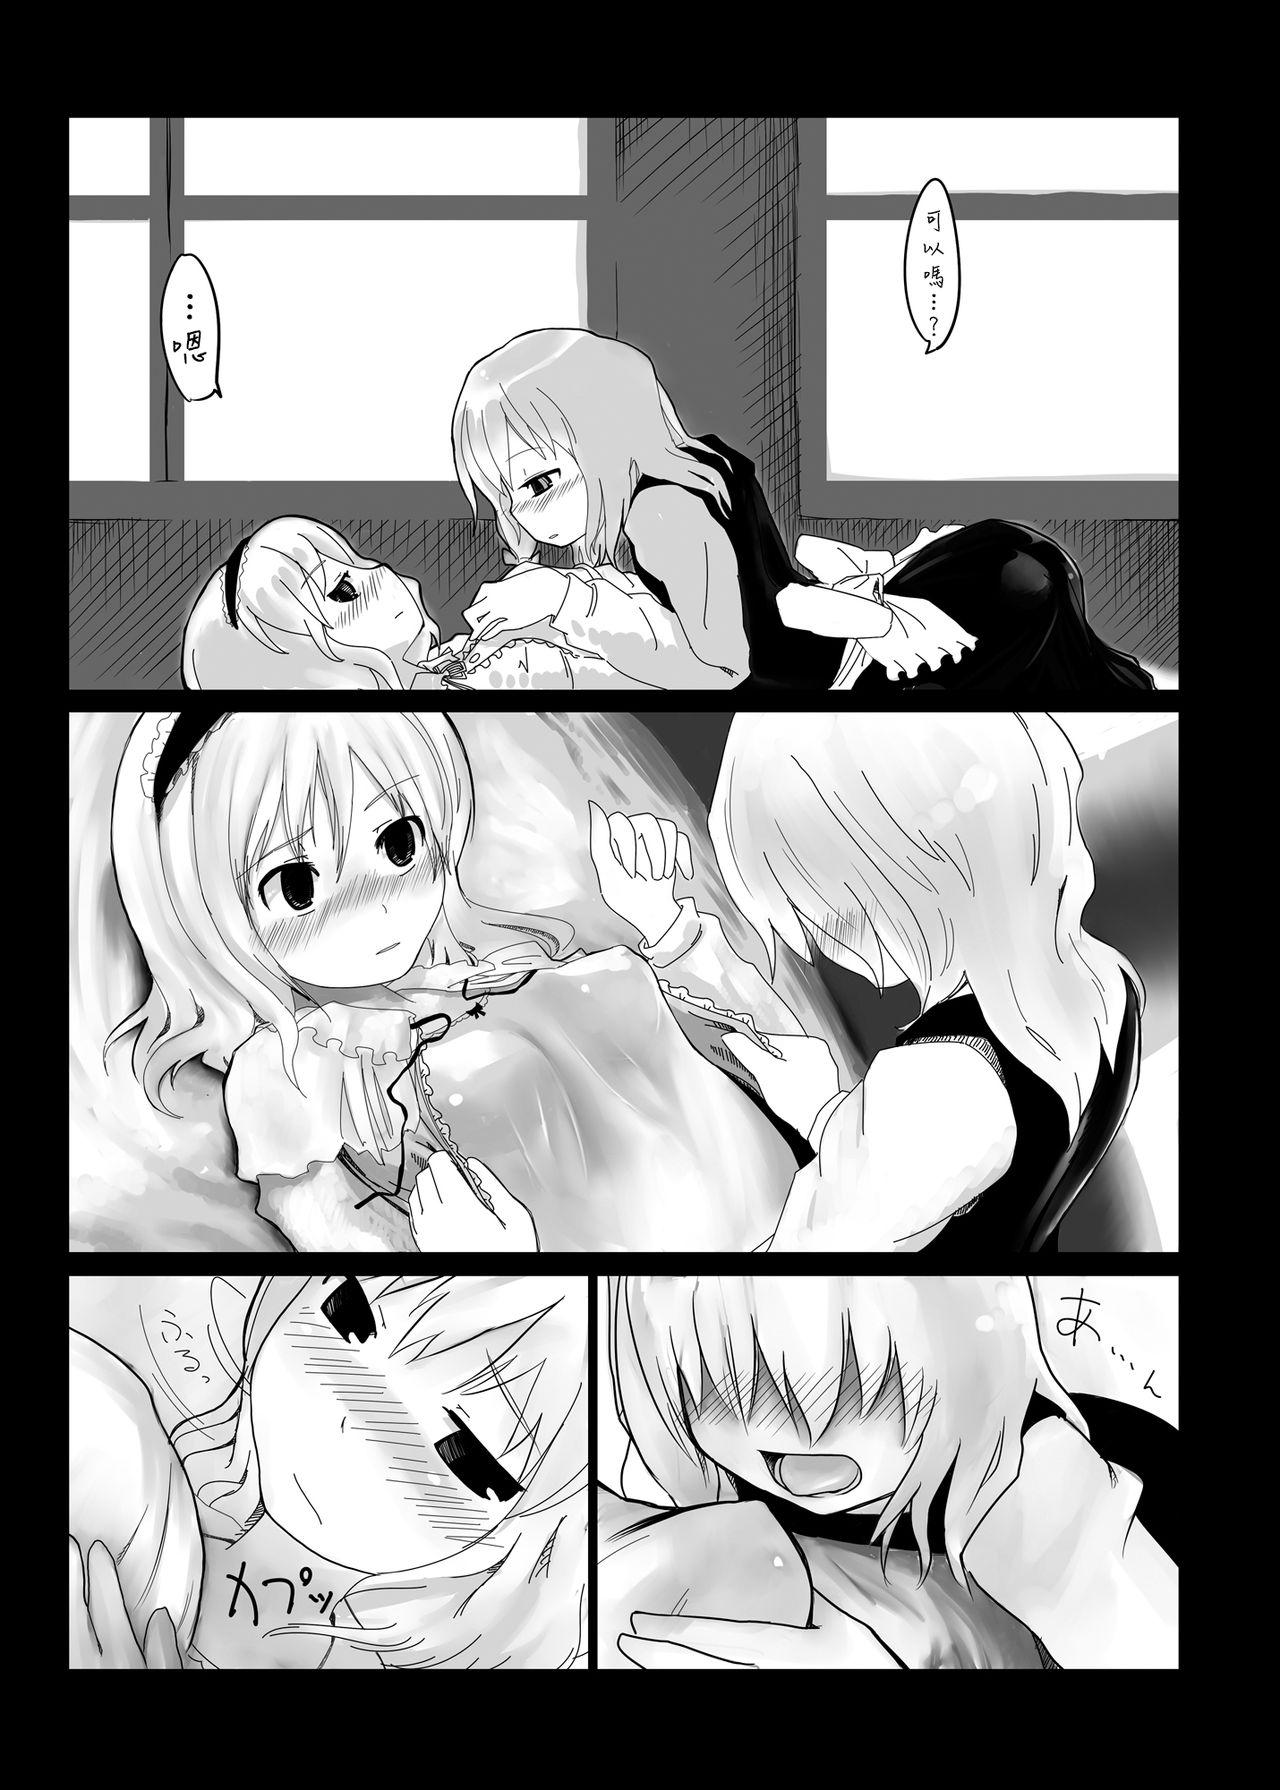 Exhibition Touhou Ero Atsume. - Touhou project Gay 3some - Page 7